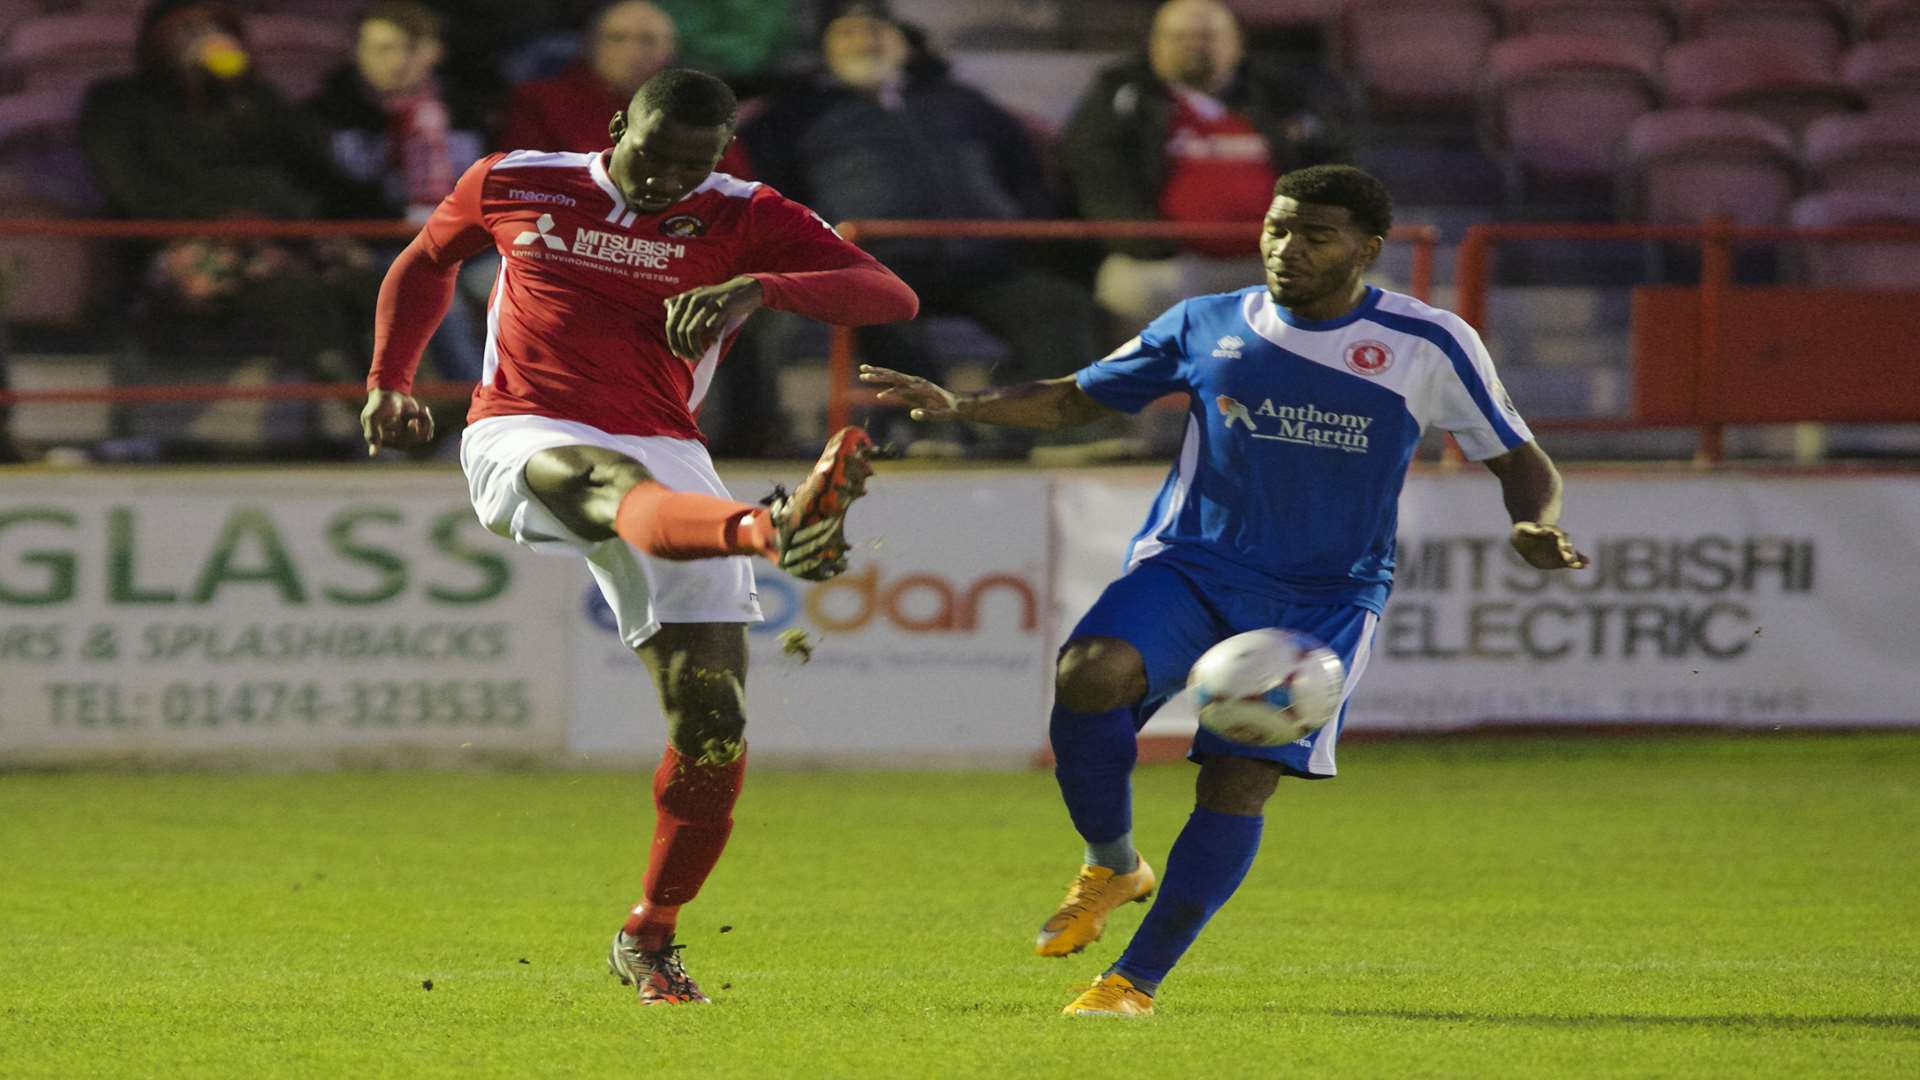 Goalscorer Anthony Acheampong clears his lines Picture: Andy Payton